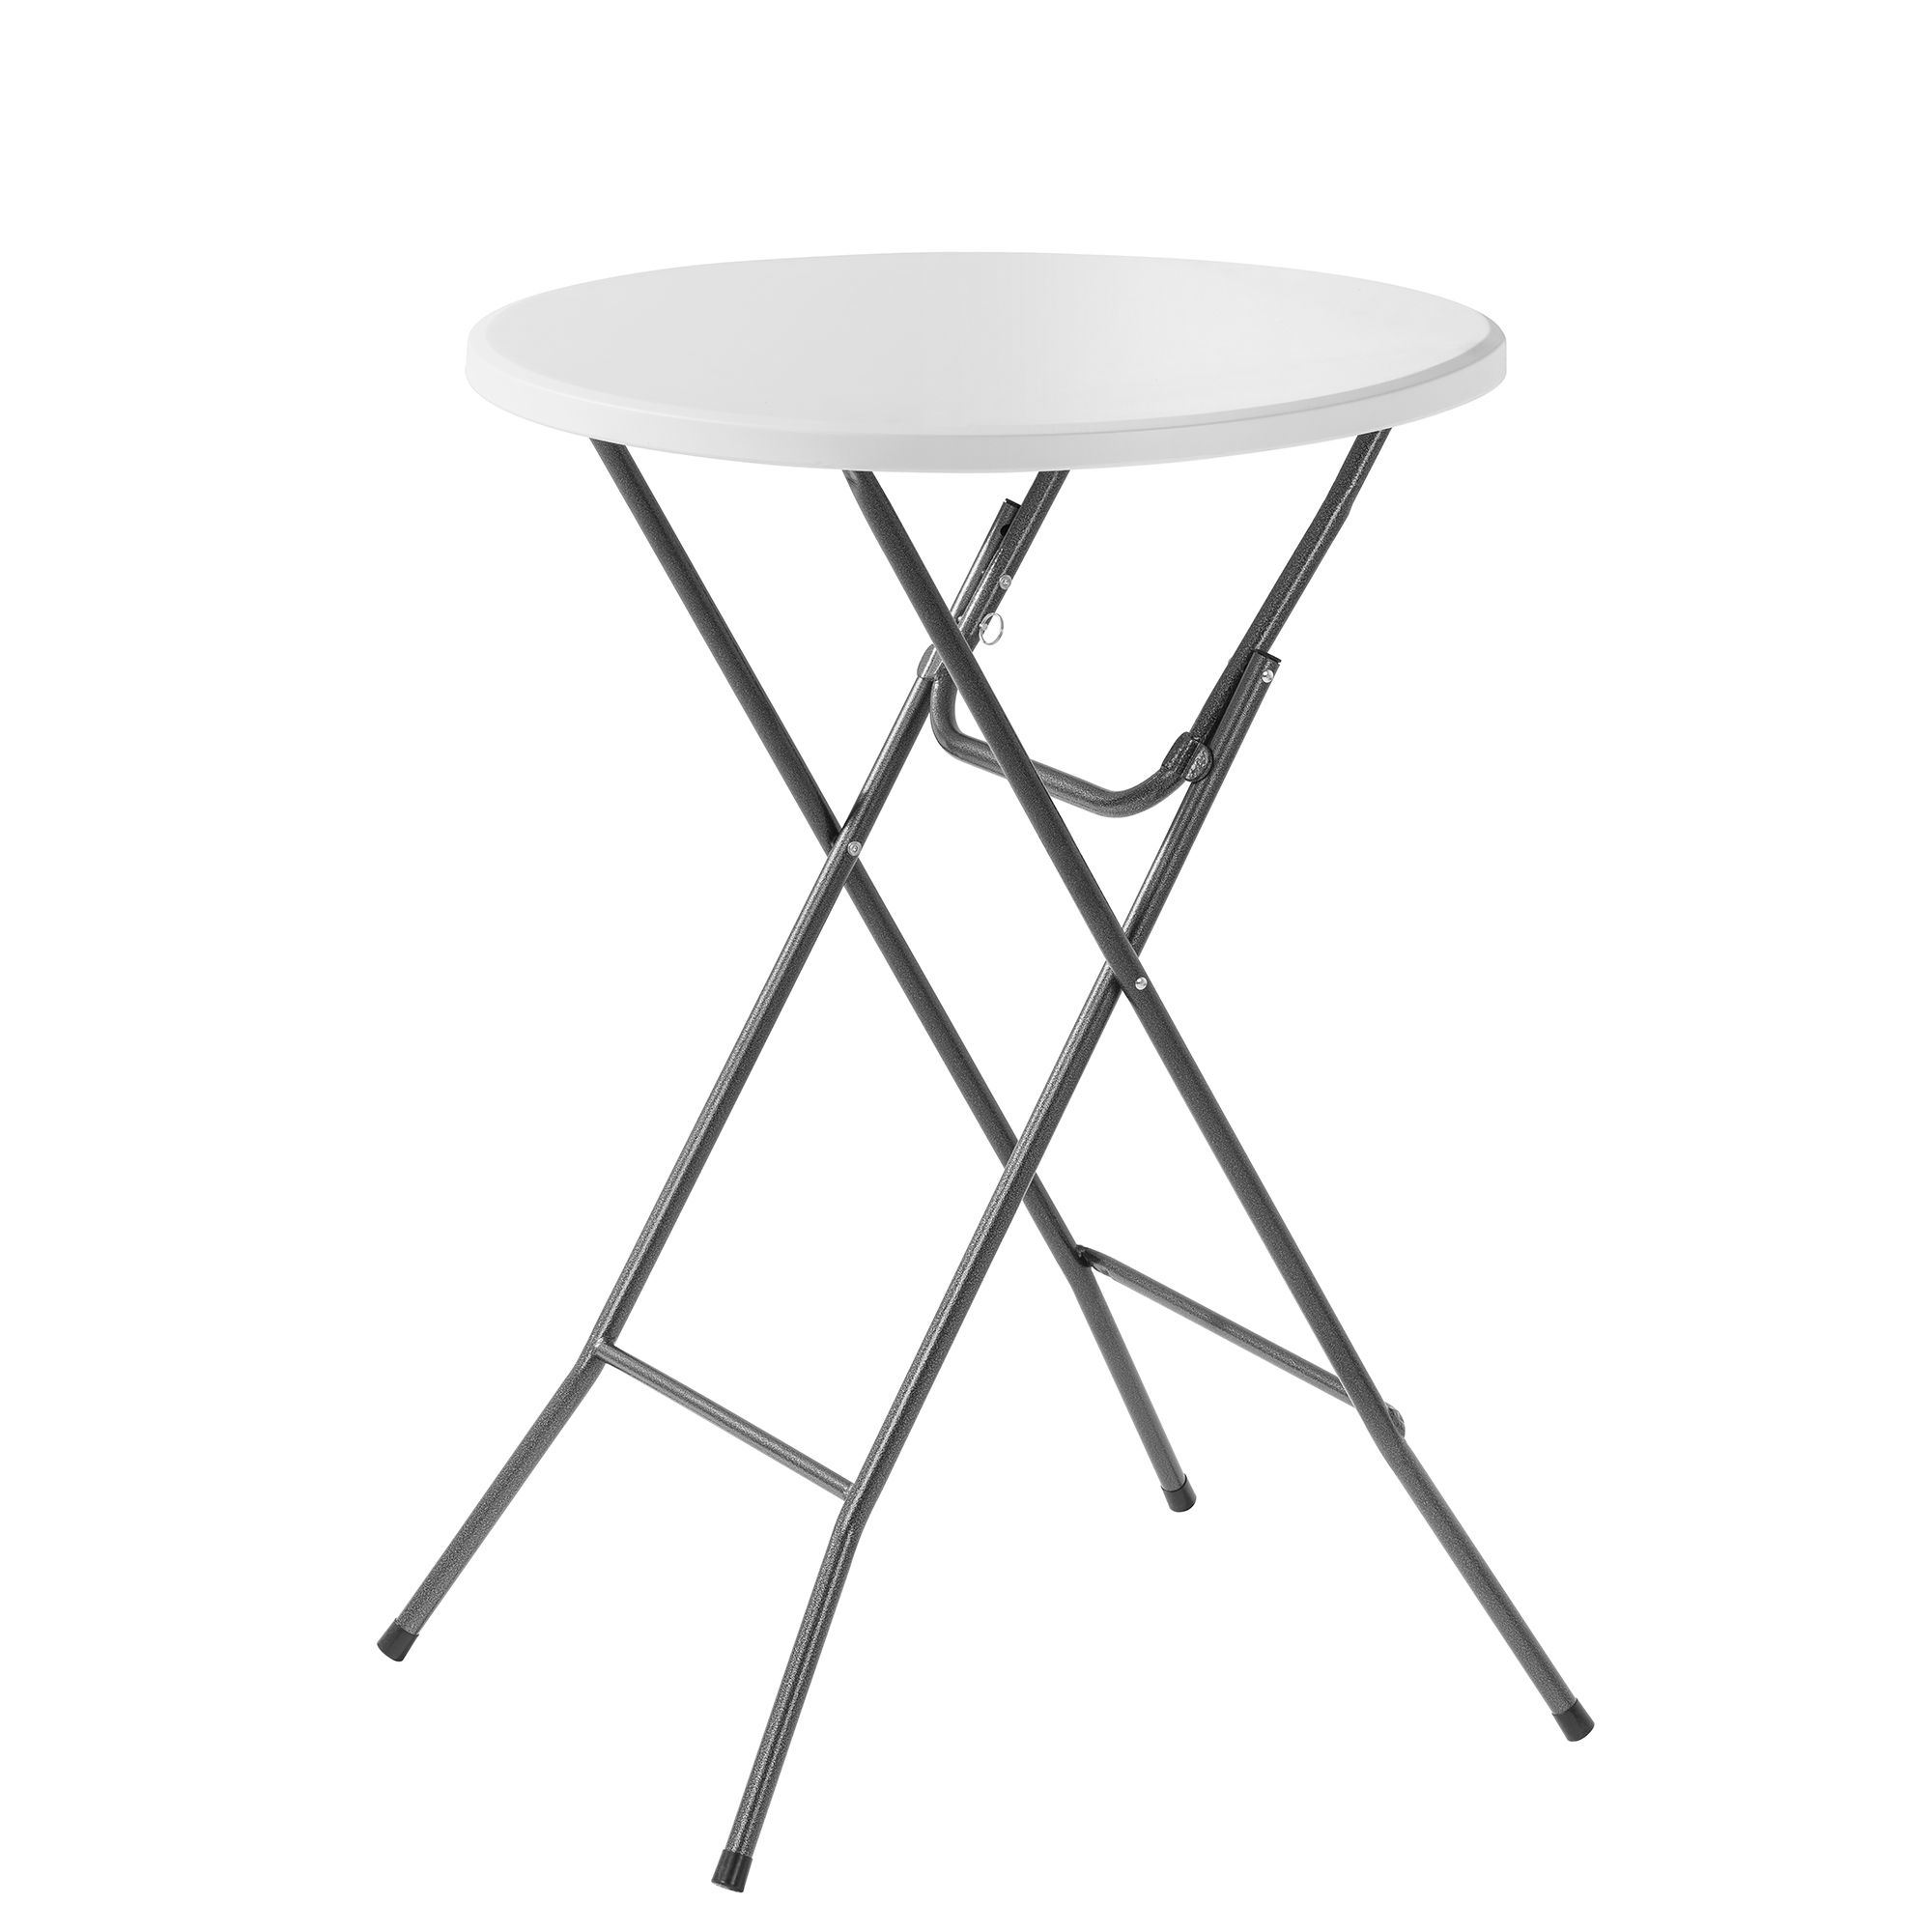 Side tables | Garden tables | B&Q